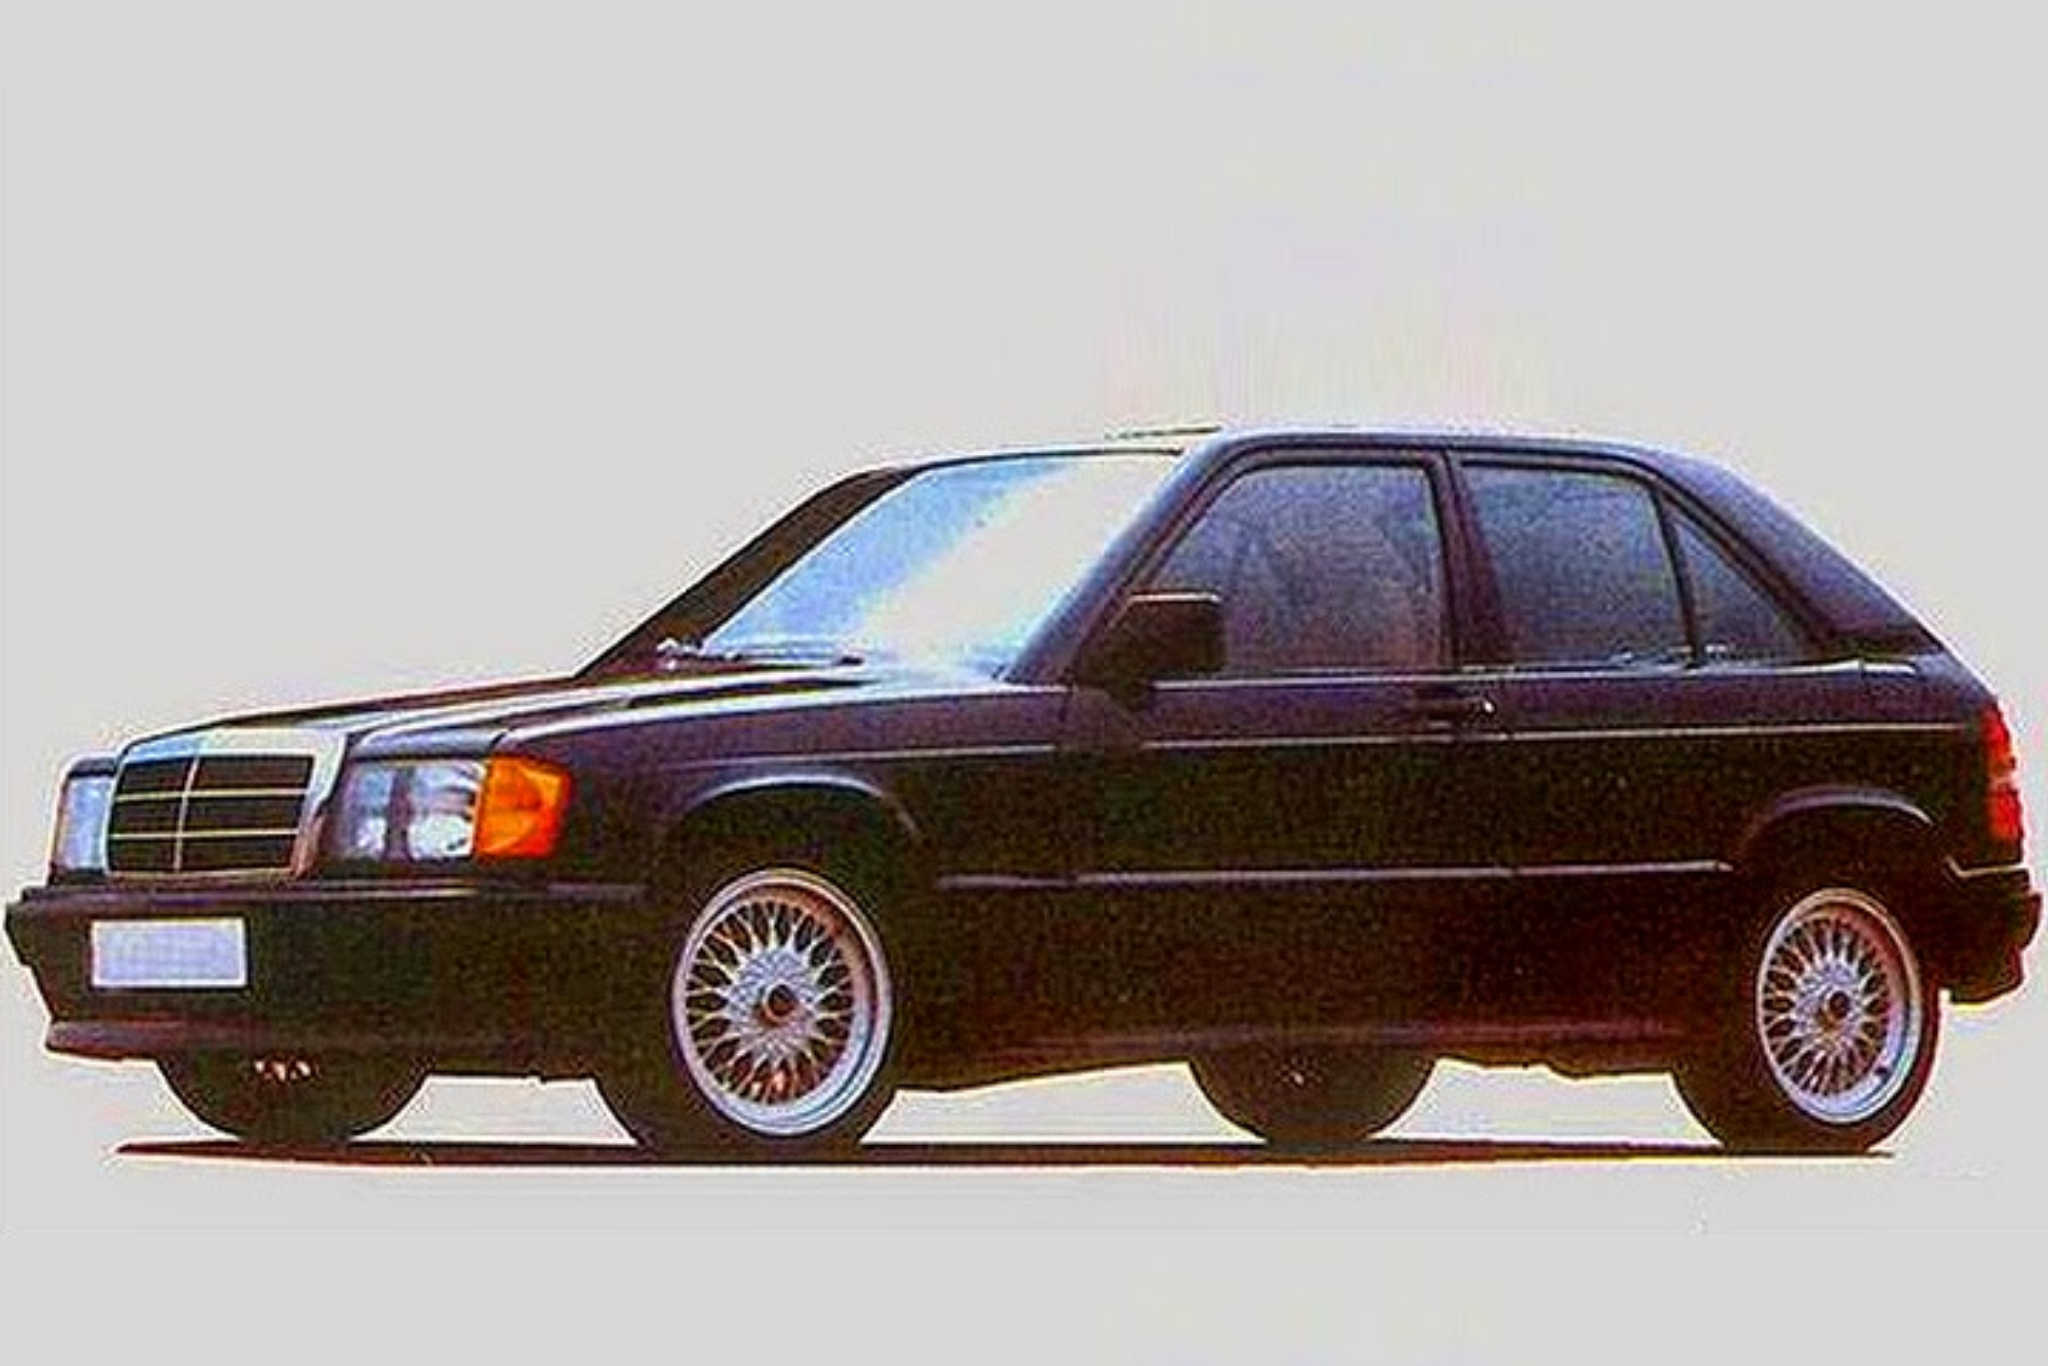 A German Tuning Company Made A Handful Of Custom 190e Hatchbacks In The Early Nineties